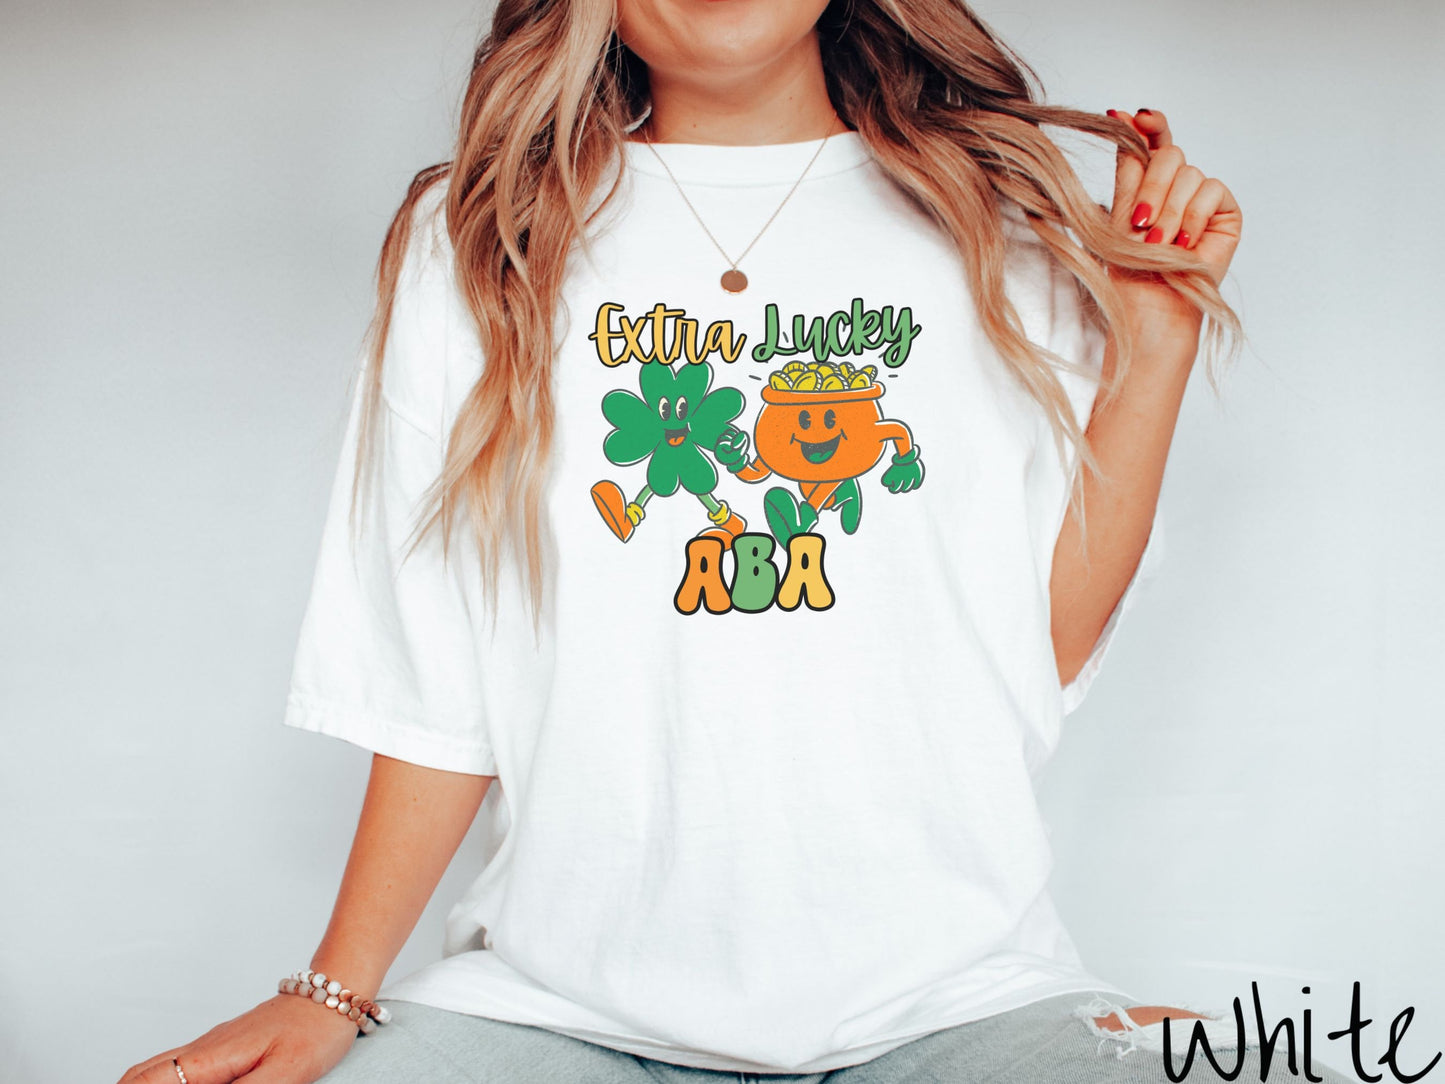 A woman wearing a vintage, white colored shirt with the text Extra Lucky ABA in yellow, orange, and green font. Between the text are a green clover and orange pot of gold smiling and walking together in step.